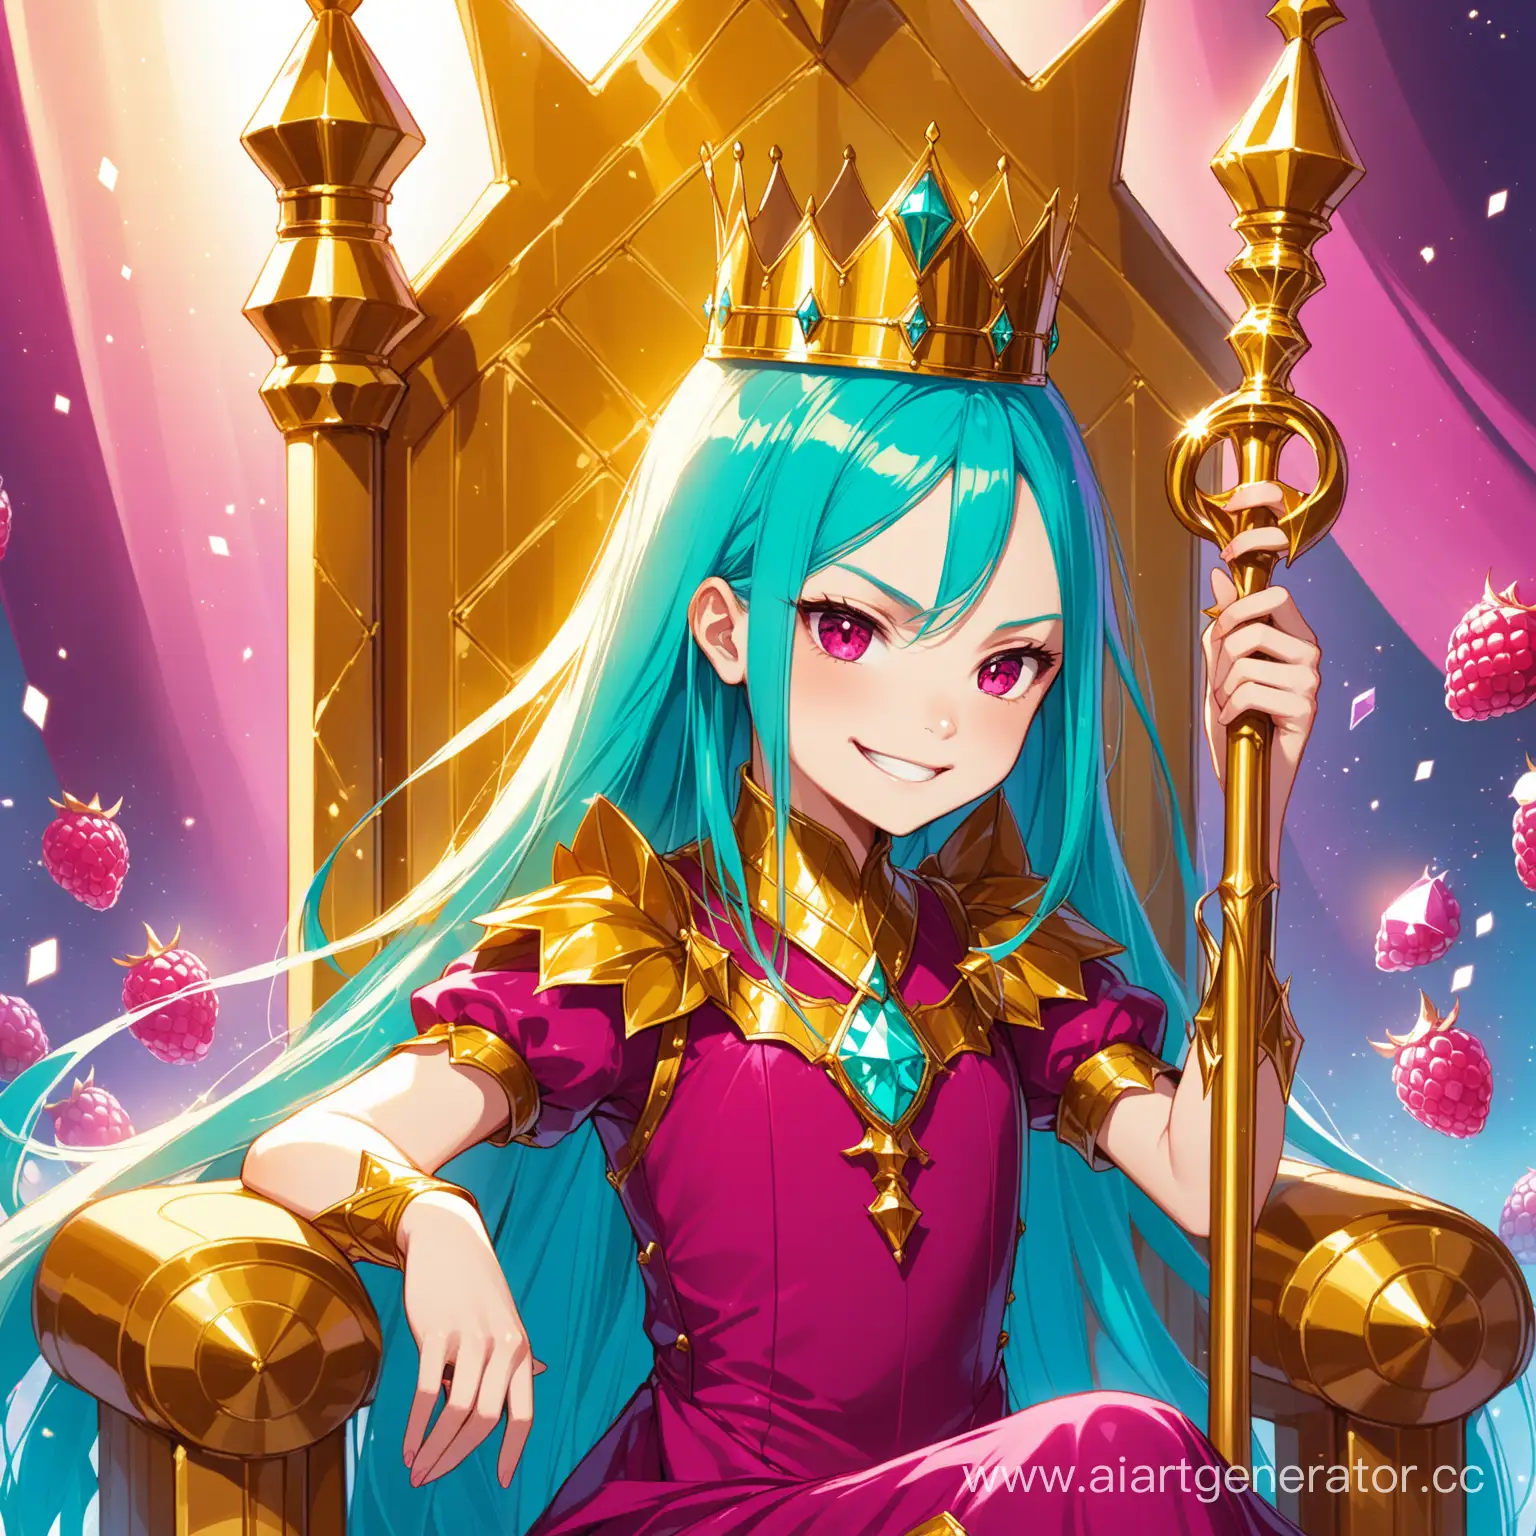 Malicious-Smirking-13YearOld-Girl-on-Golden-Throne-with-Crown-and-Staff